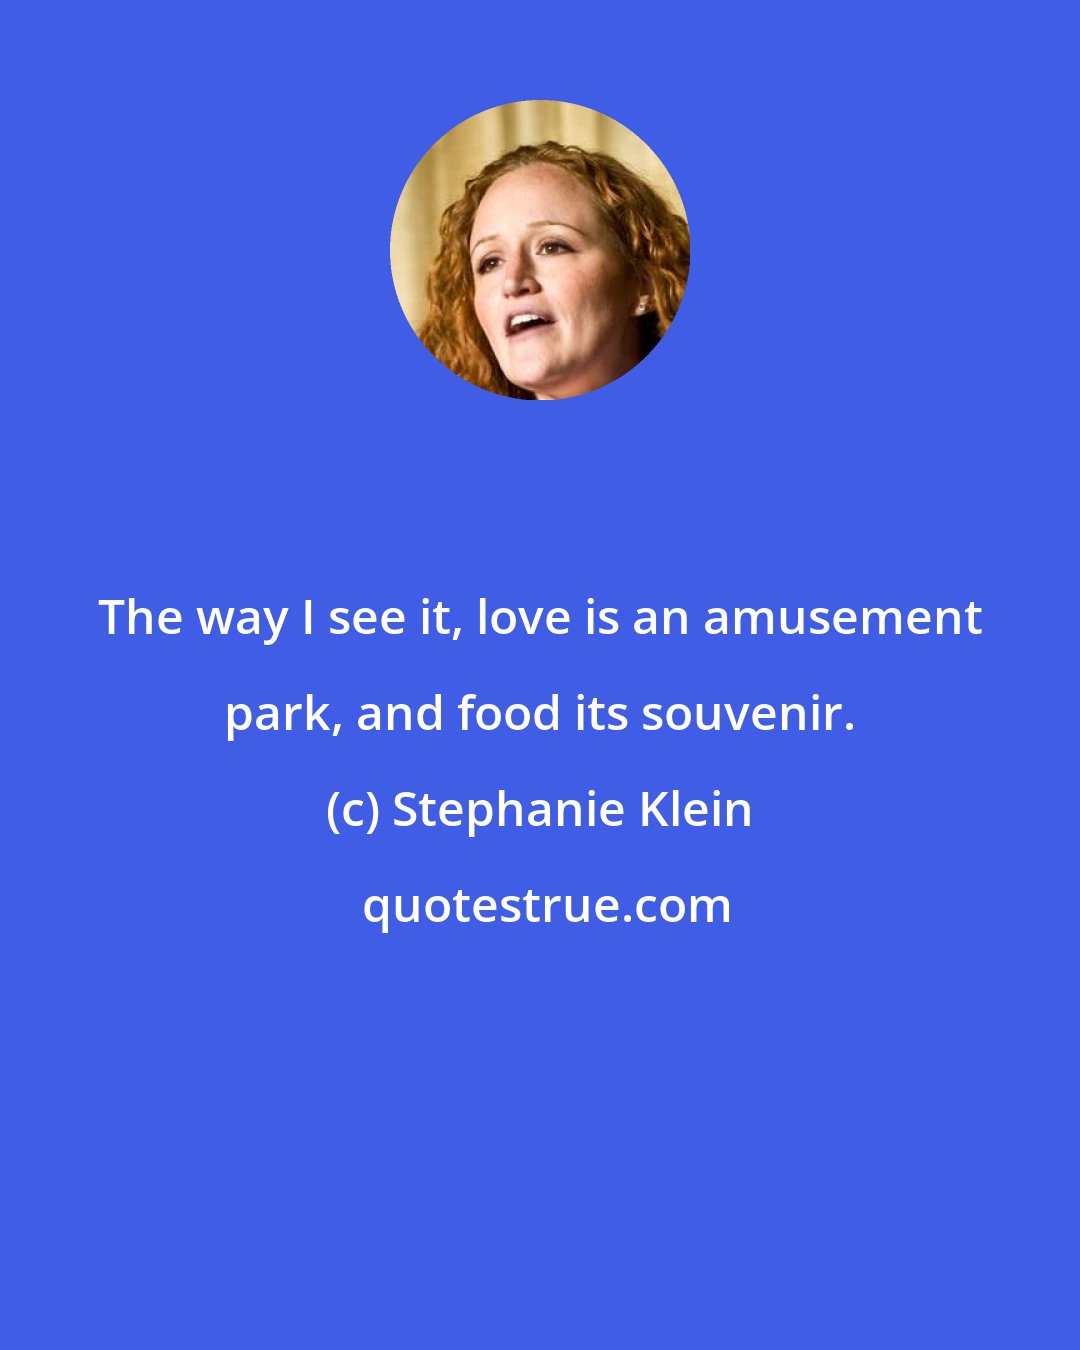 Stephanie Klein: The way I see it, love is an amusement park, and food its souvenir.